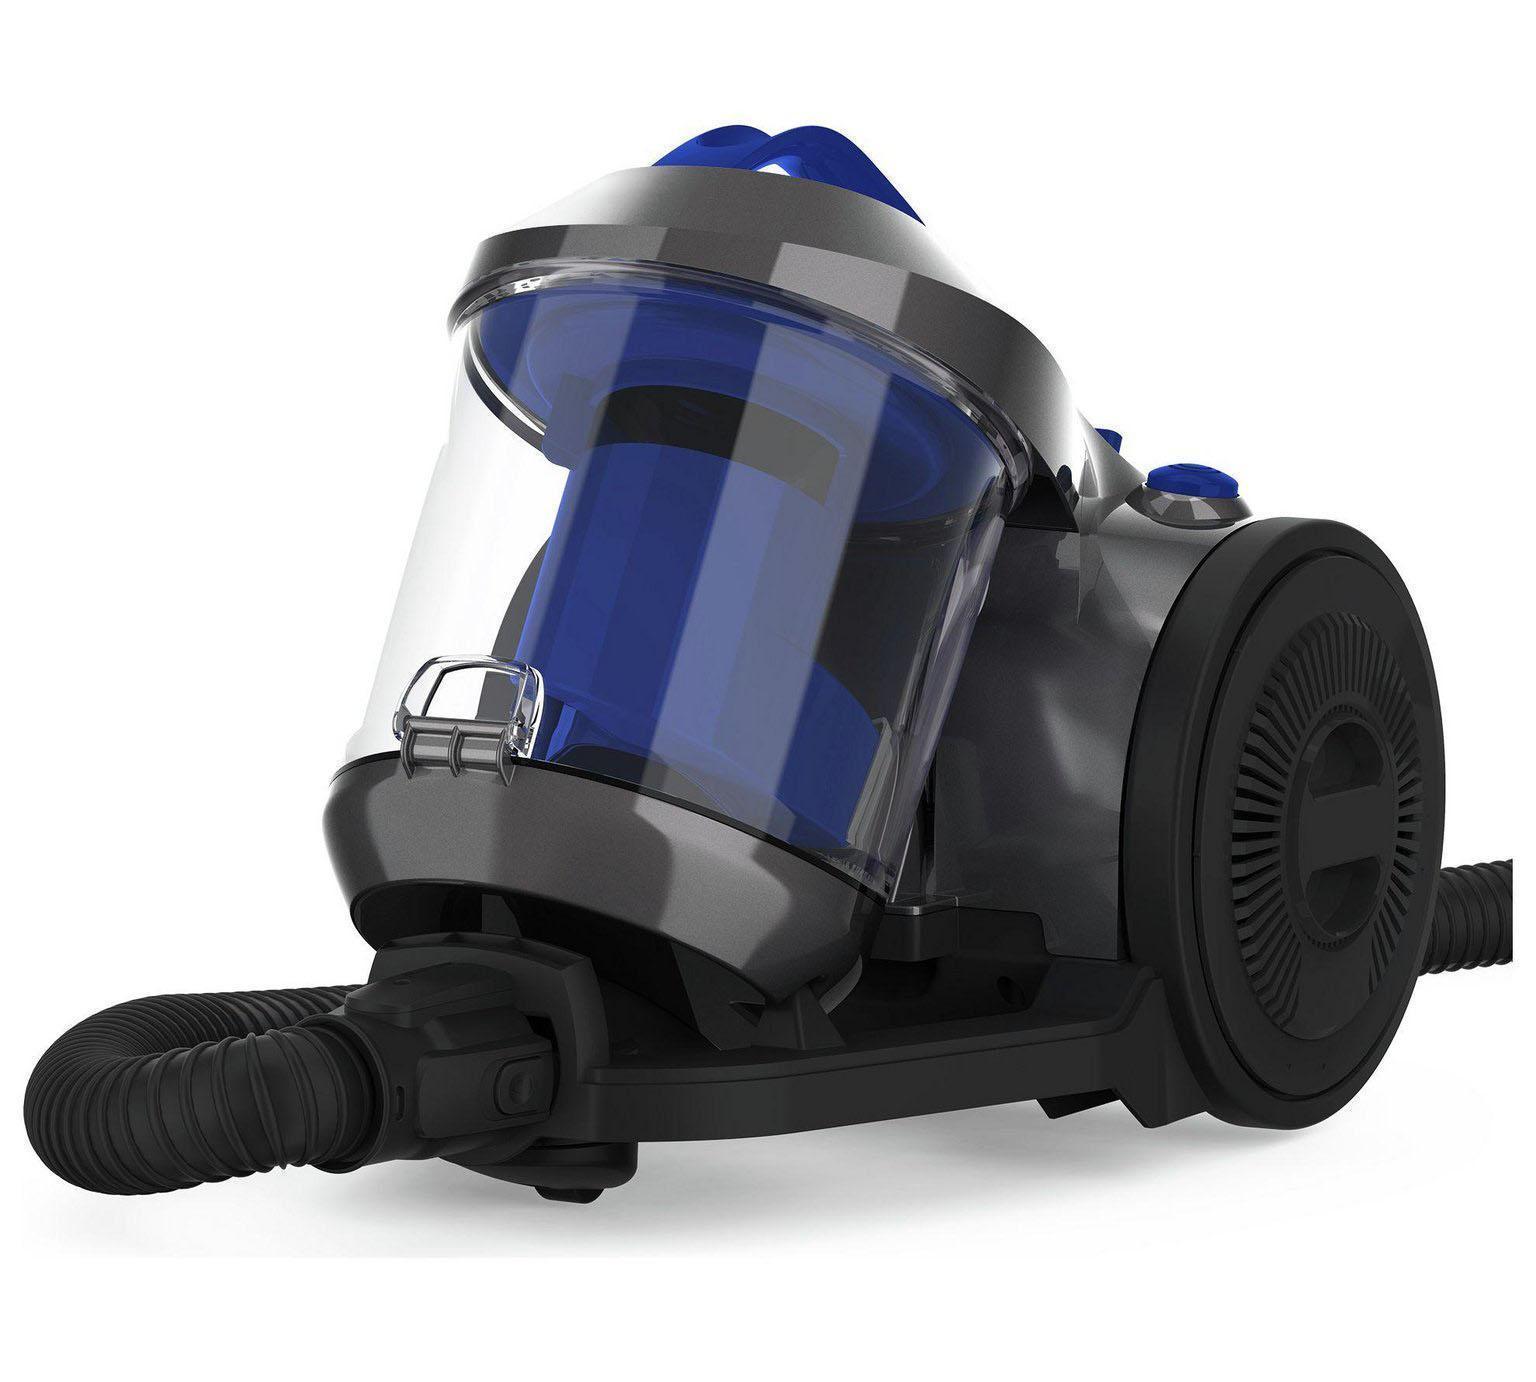 CCMBPV1P1 Power Pet Cylinder Vacuum Cleaner